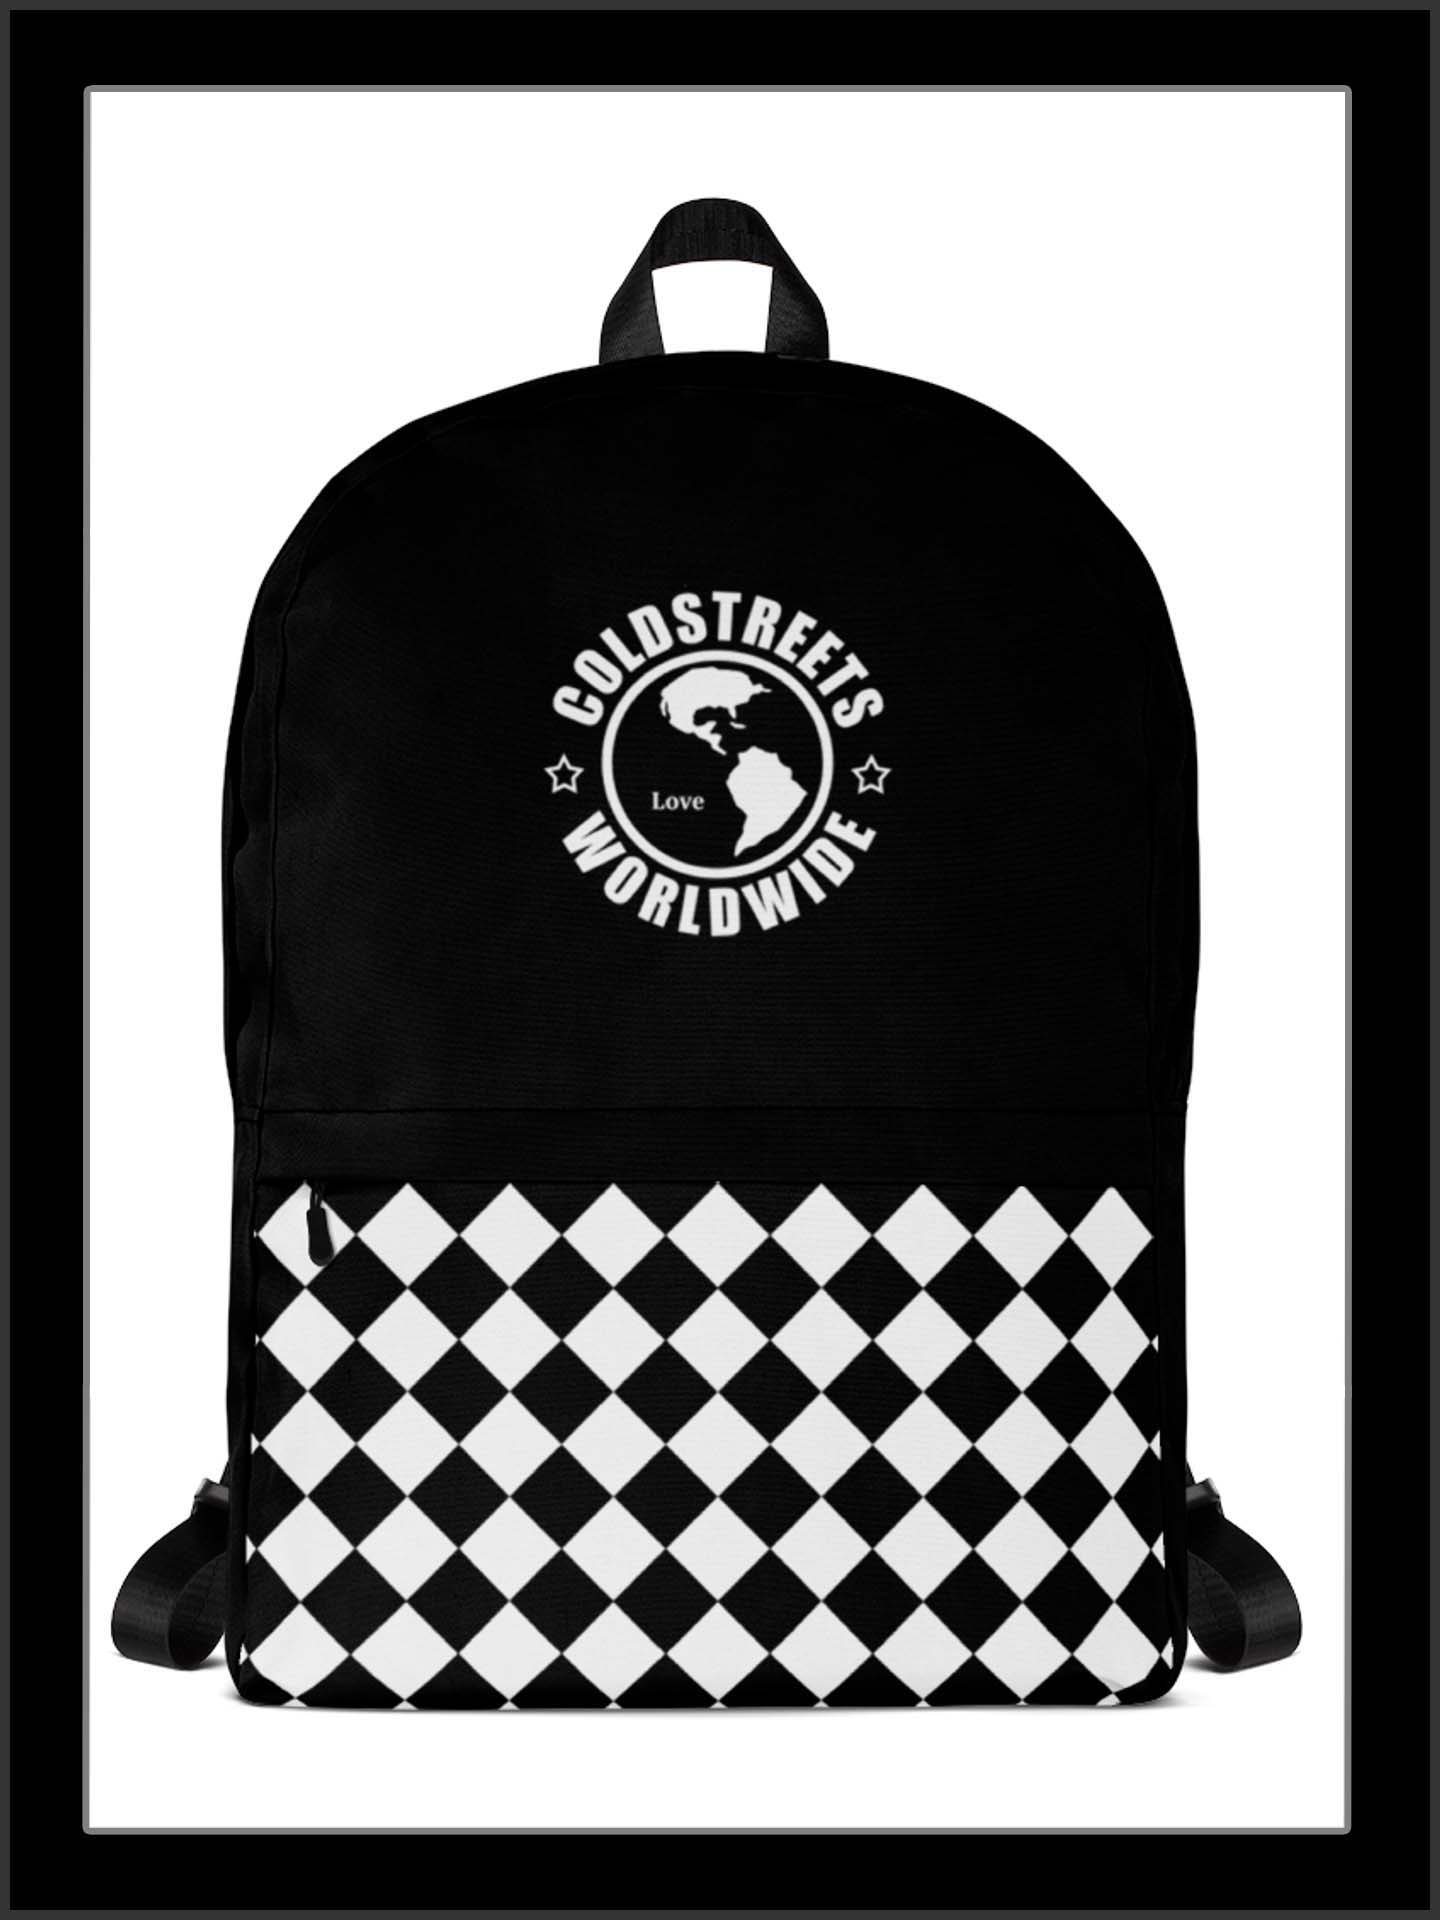 Cold Streets Maryland Backpacks